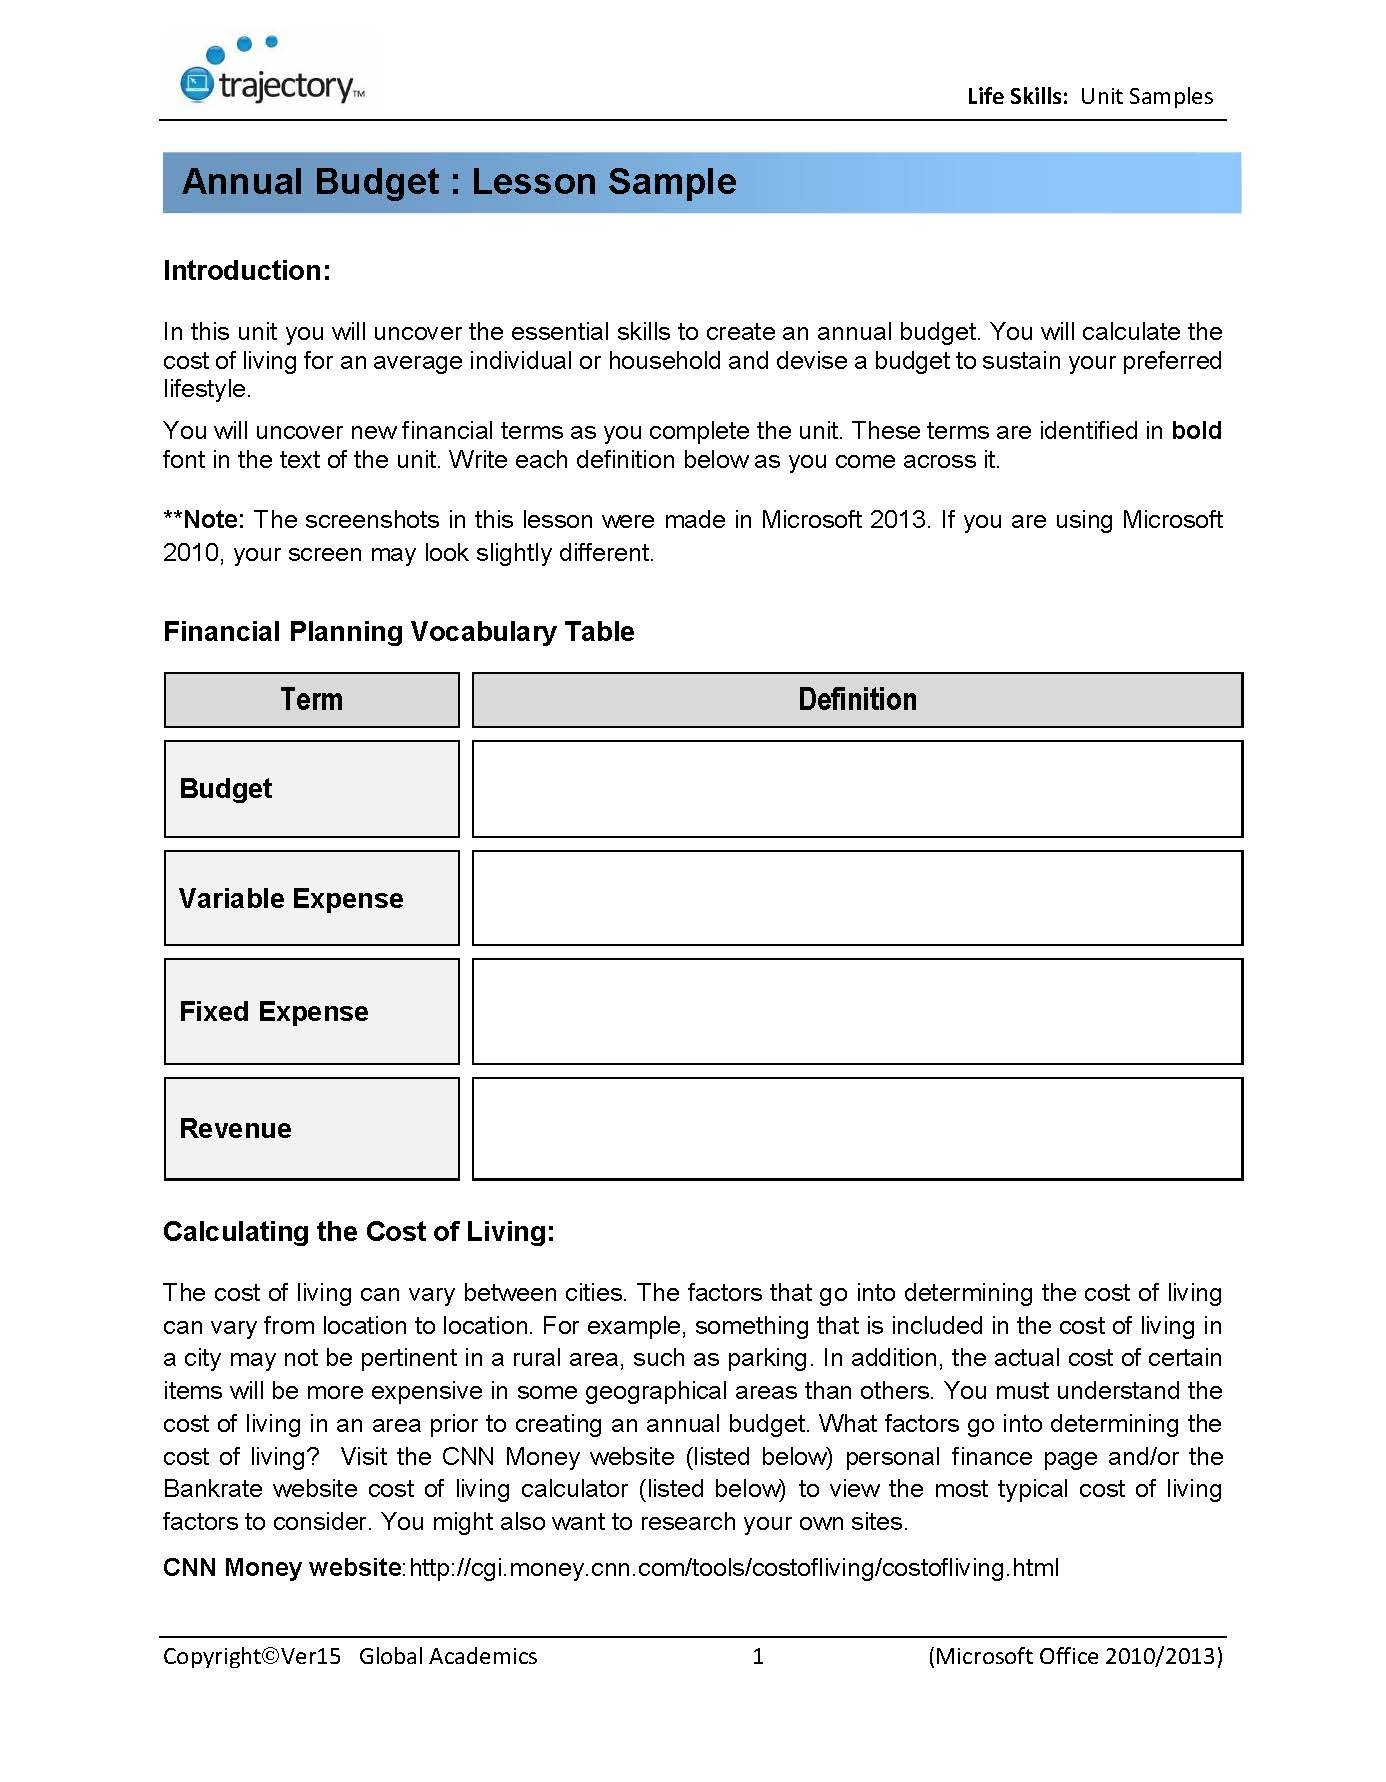 Trajectory Teachers The Curriculum Of Computer Technology For K8 Together With Life Skills Worksheets High School Pdf